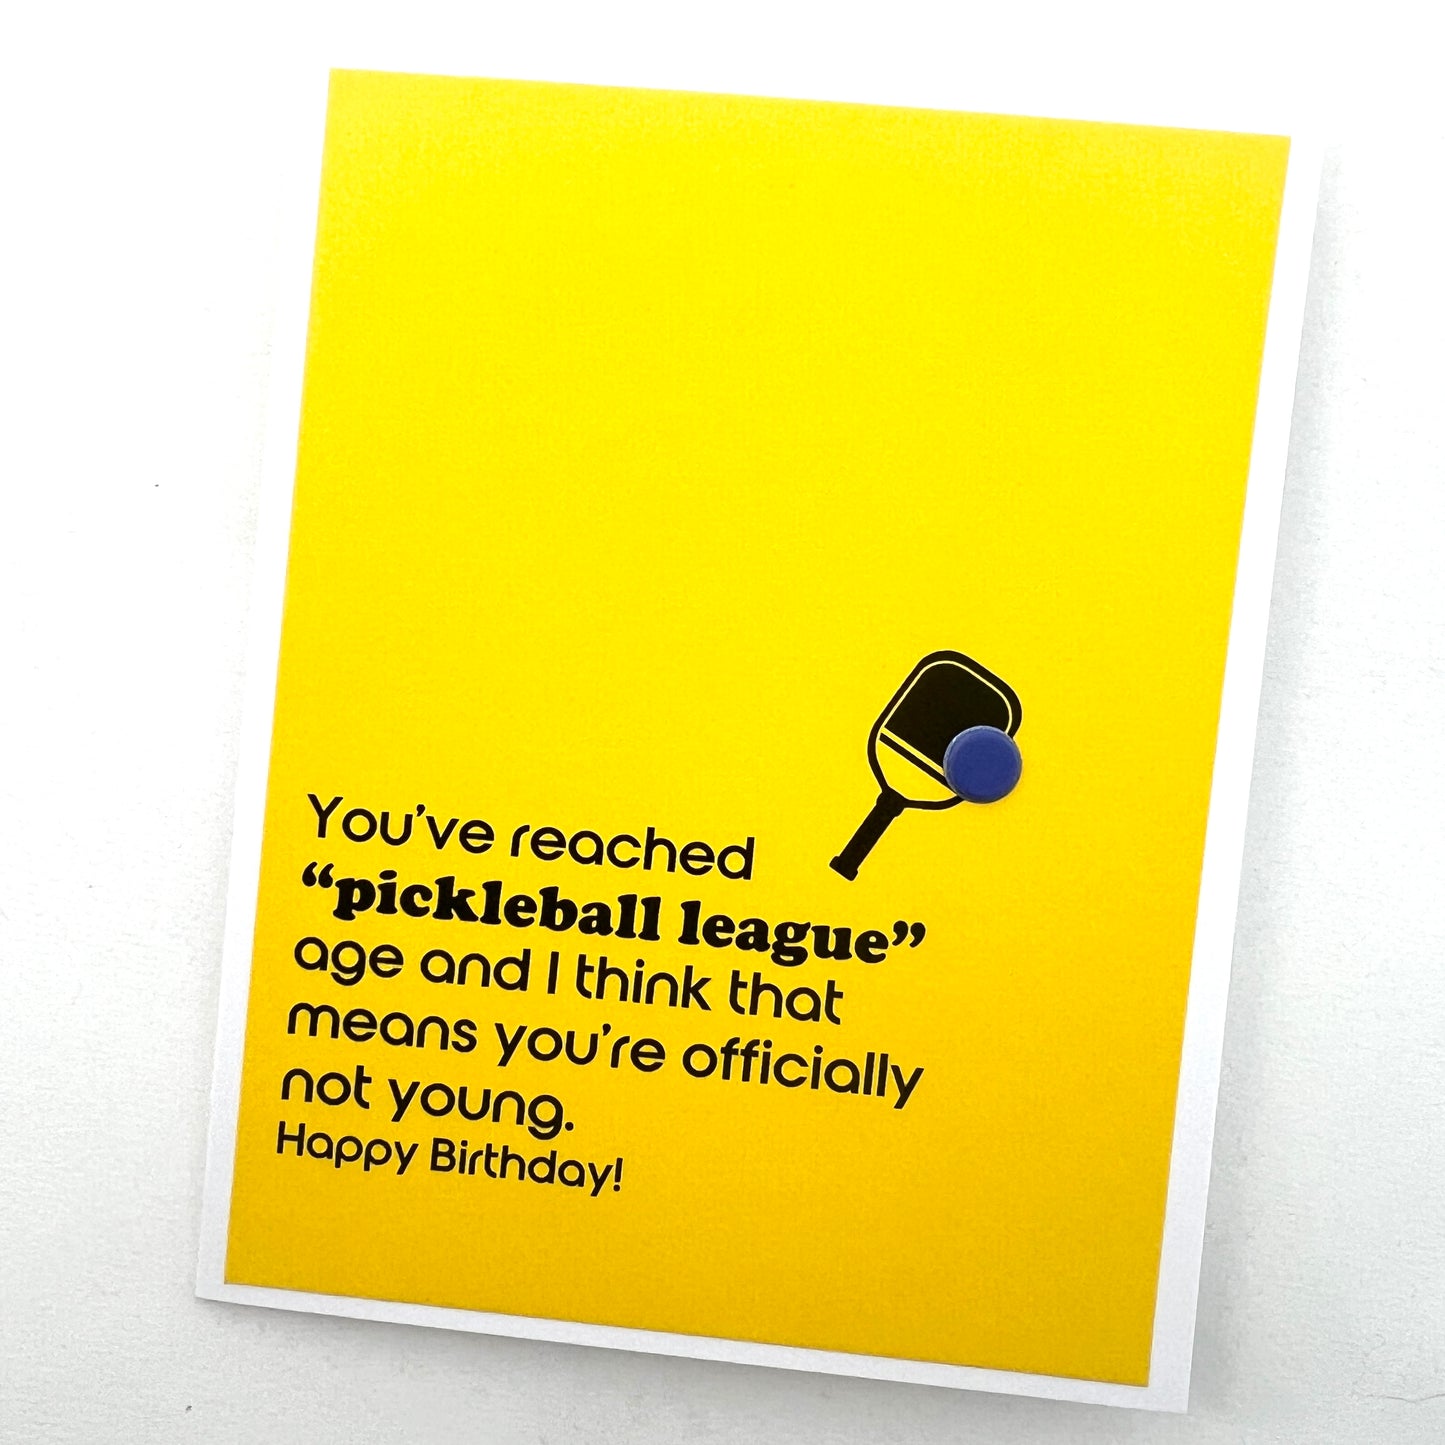 Pickleball League Not Young card